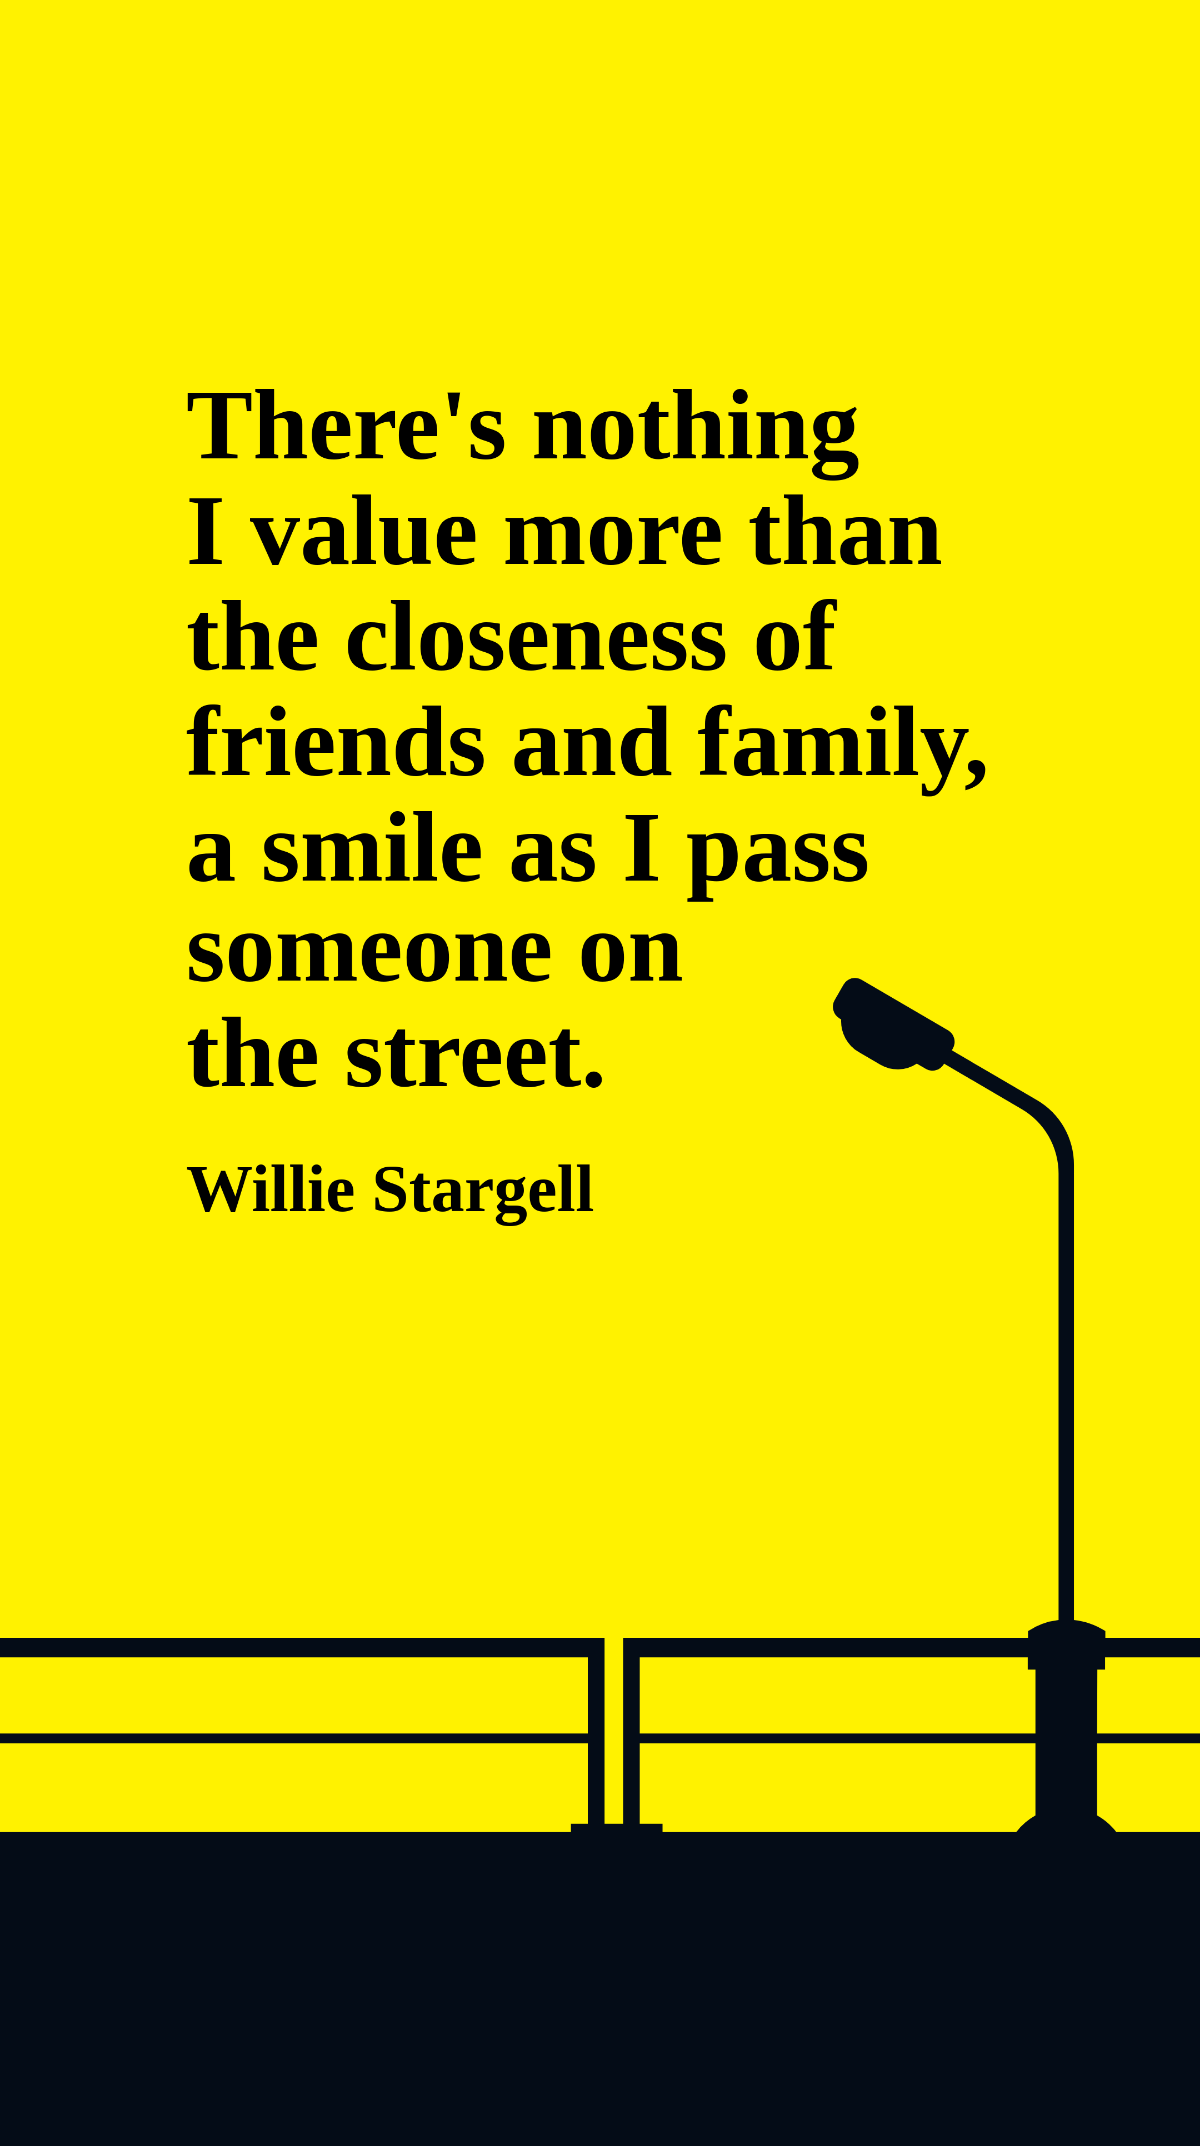 Willie Stargell - There's nothing I value more than the closeness of friends and family, a smile as I pass someone on the street. Template